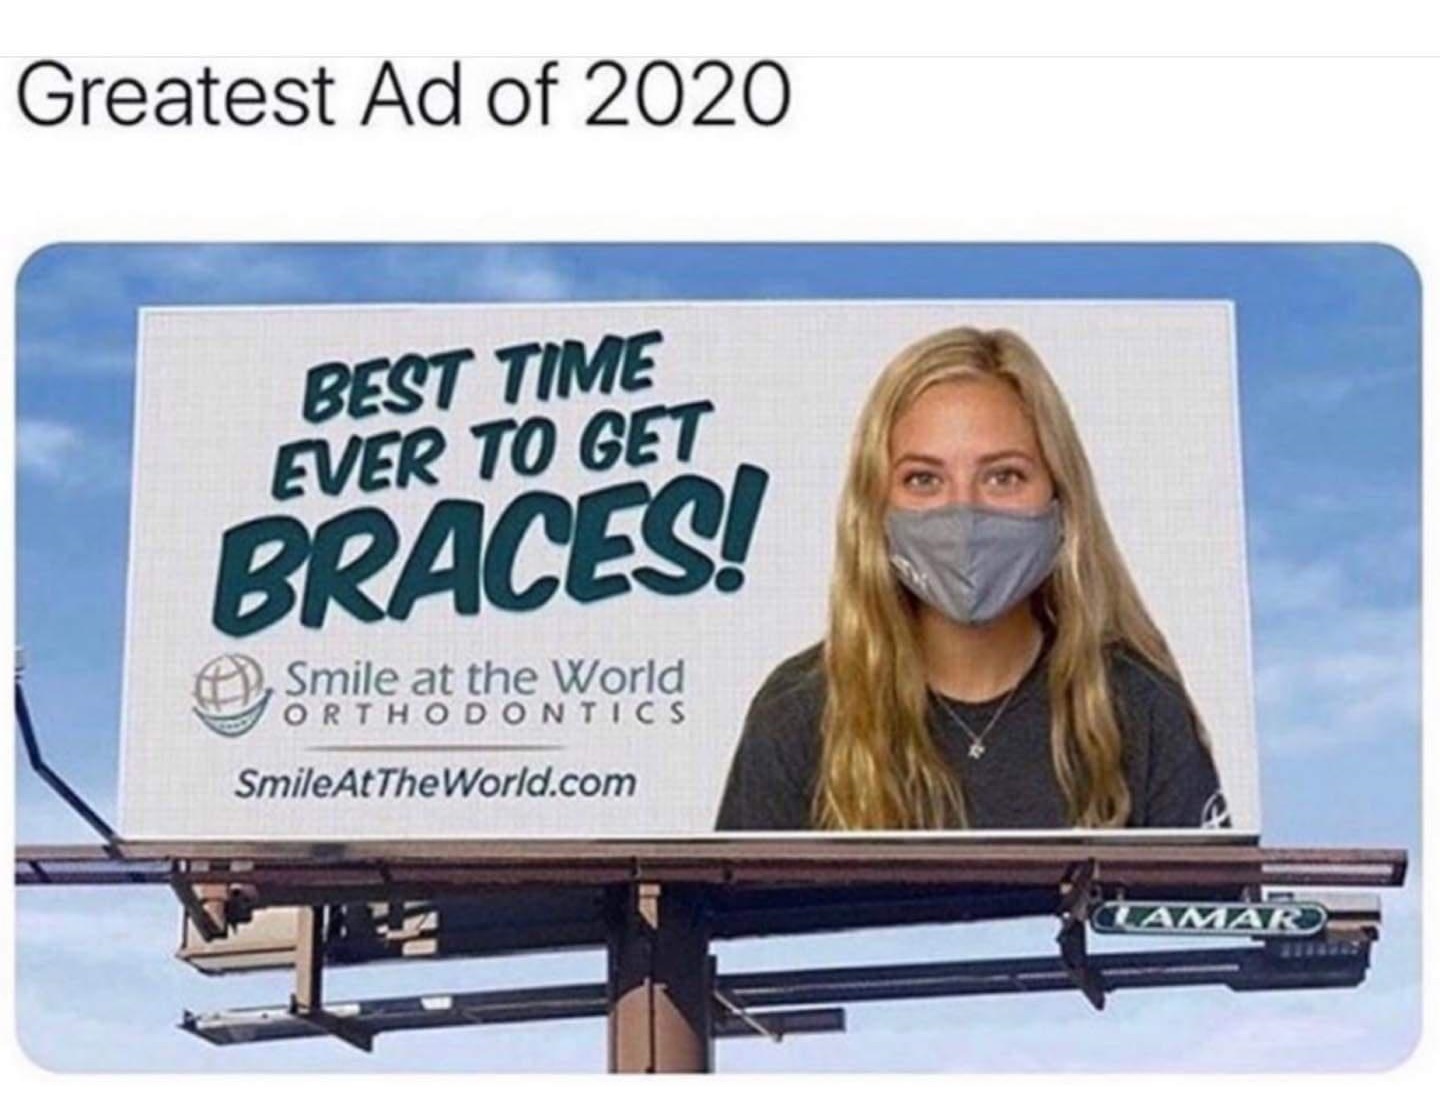 Dental braces - Greatest Ad of 2020 Best Time Ever To Get Braces! Smile at the World Orthodontics SmileAt The World.com Tamar